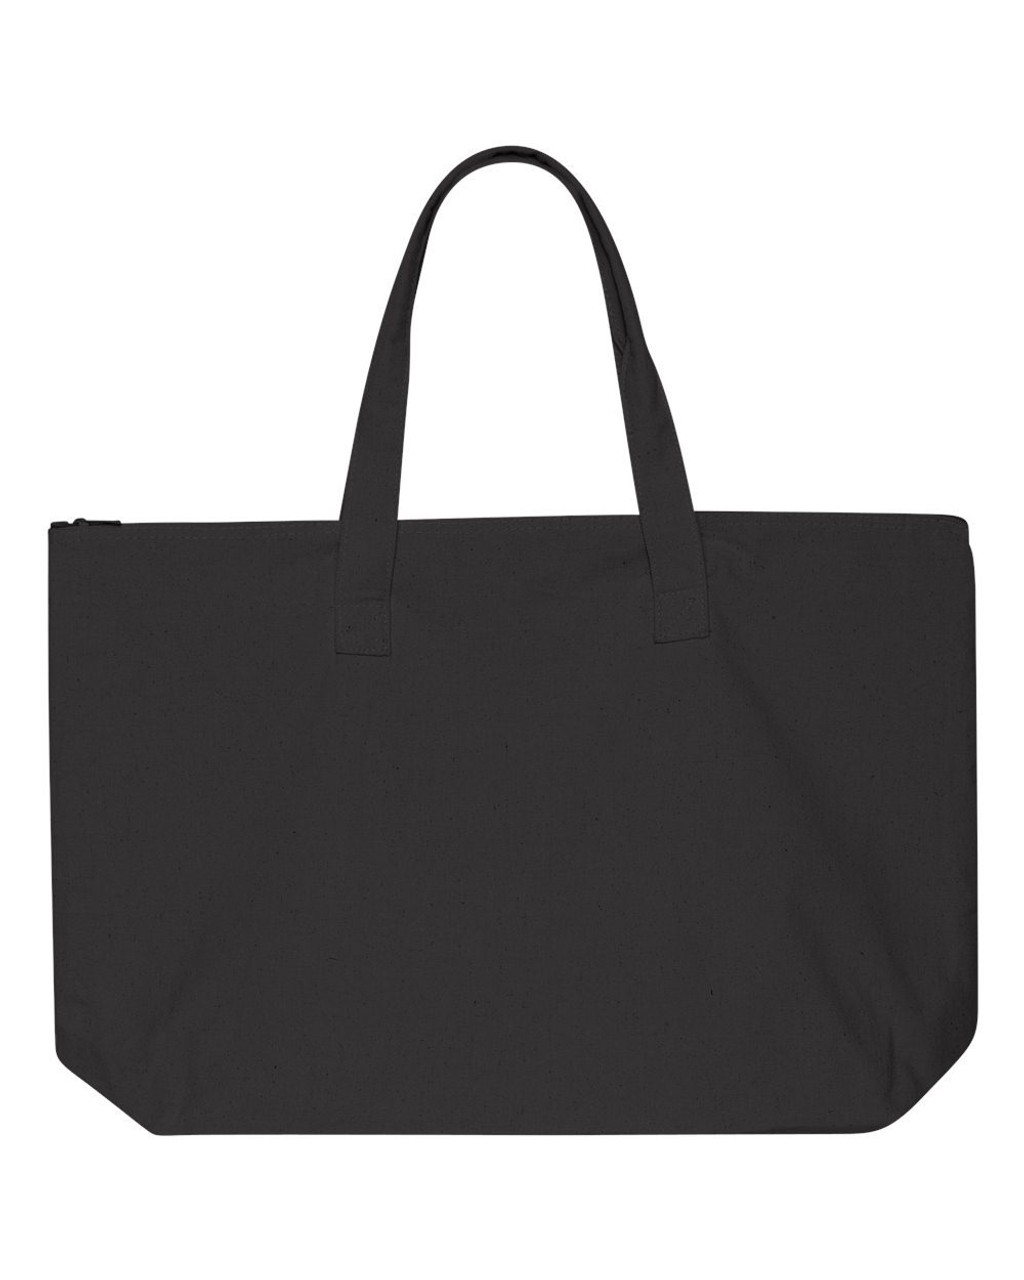 Tote with Top Zippered Closure - 8863